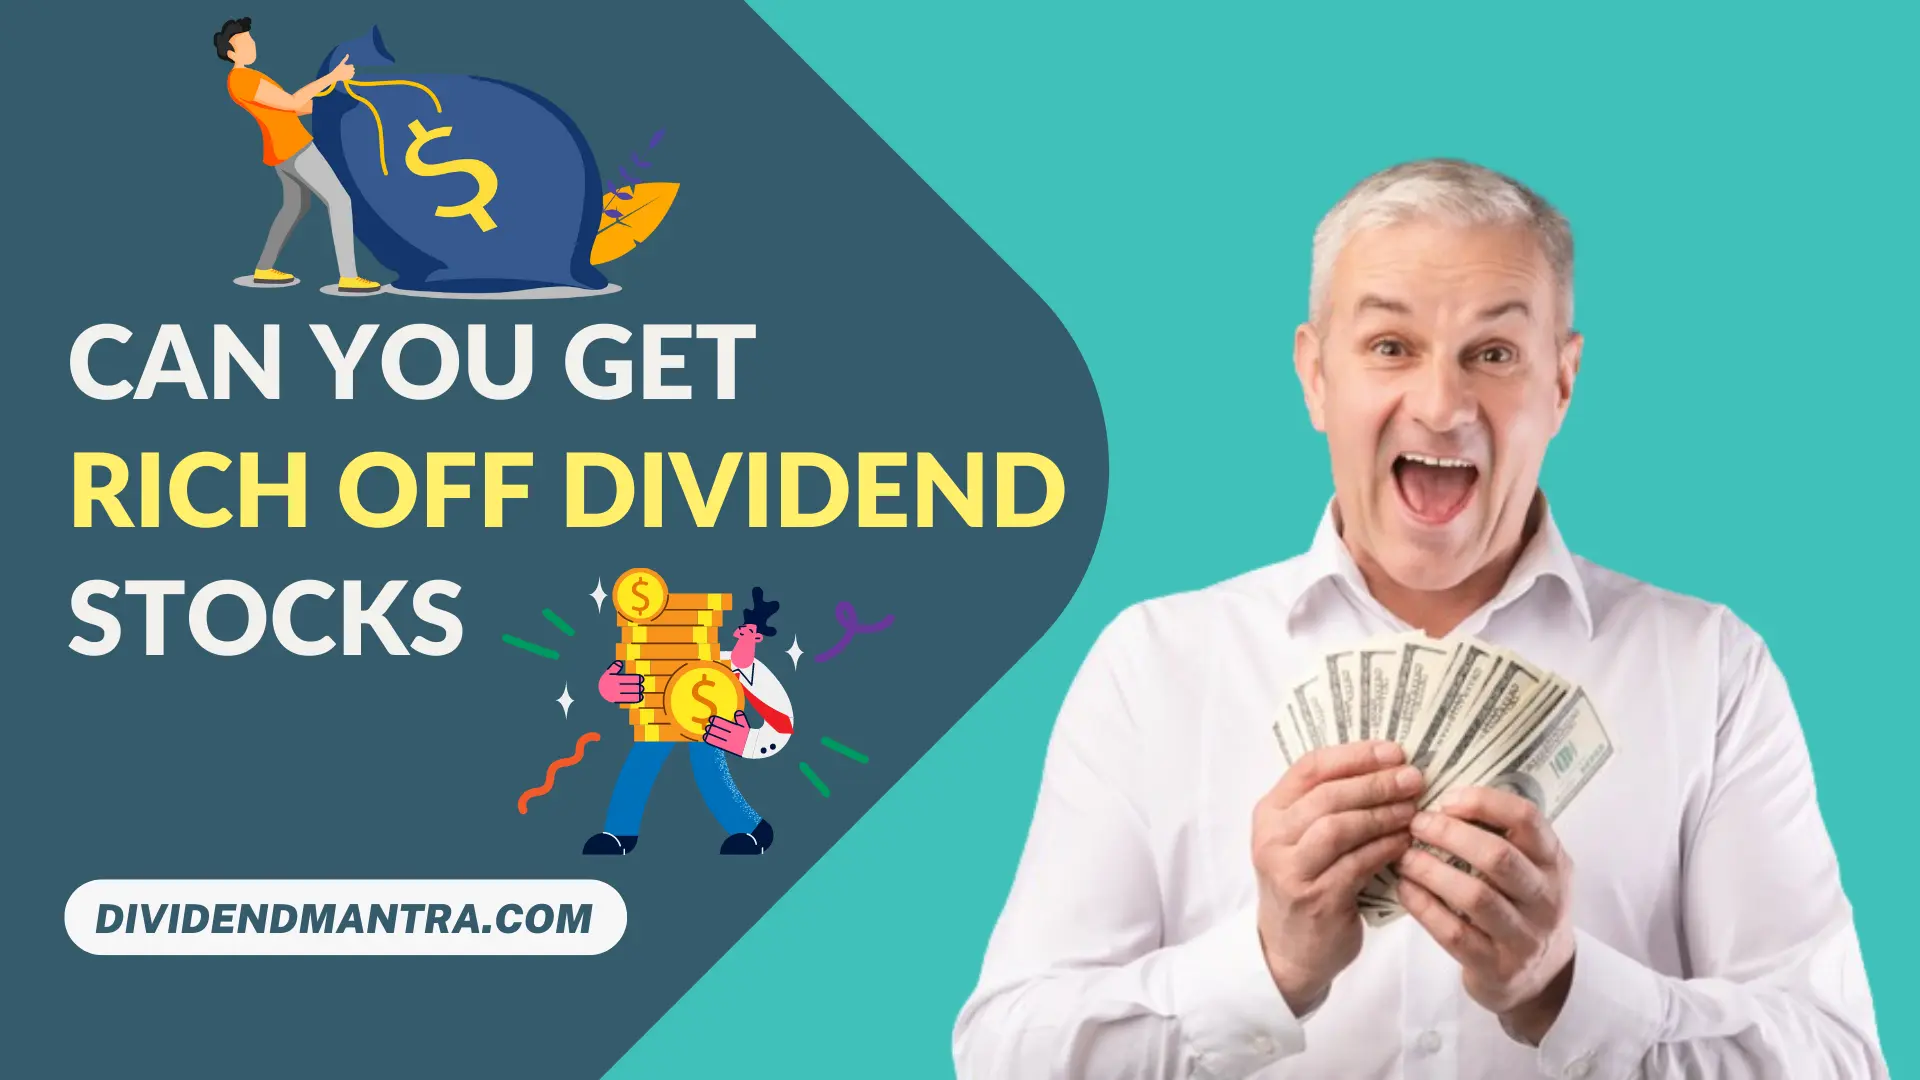 Can You Get Rich off Dividend Stocks